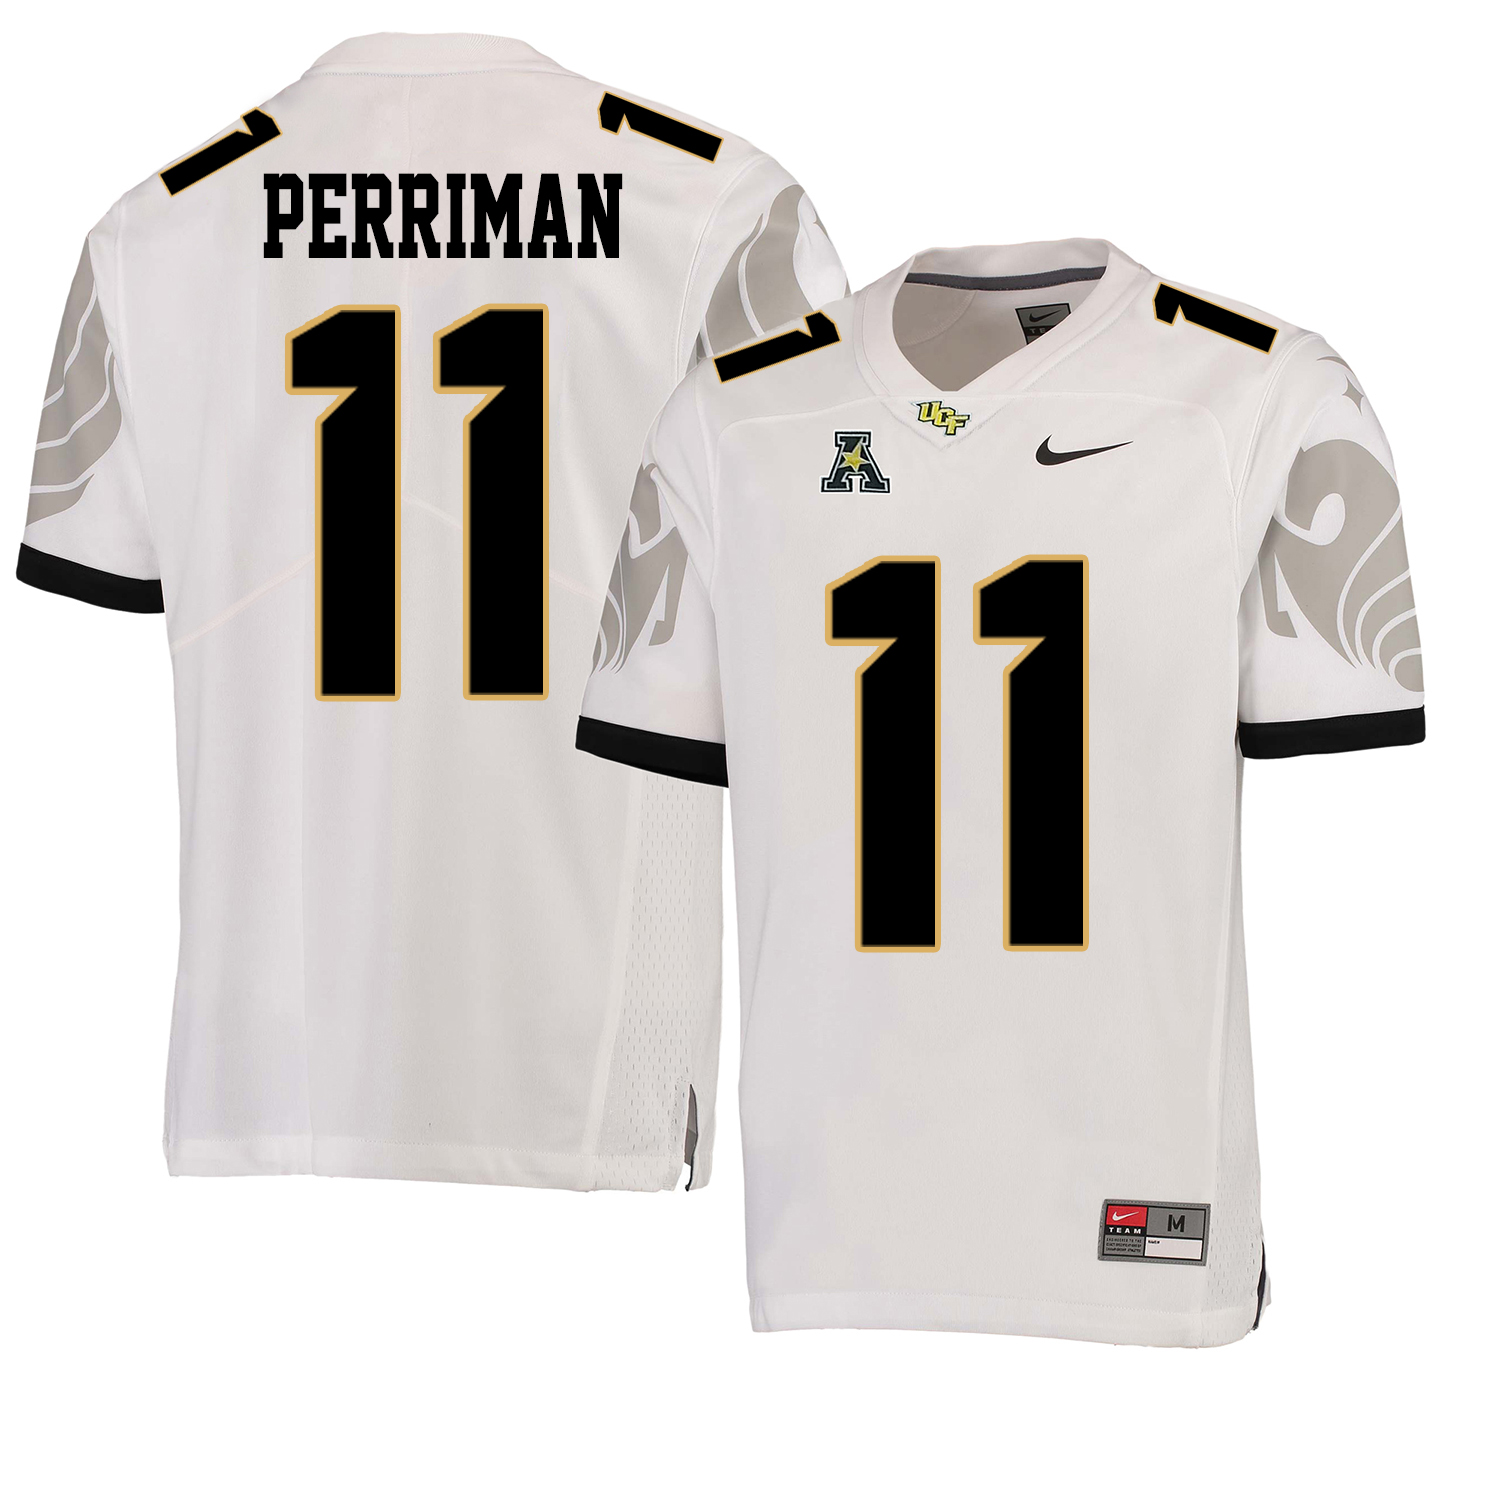 UCF Knights 11 Breshad Perriman White College Football Jersey